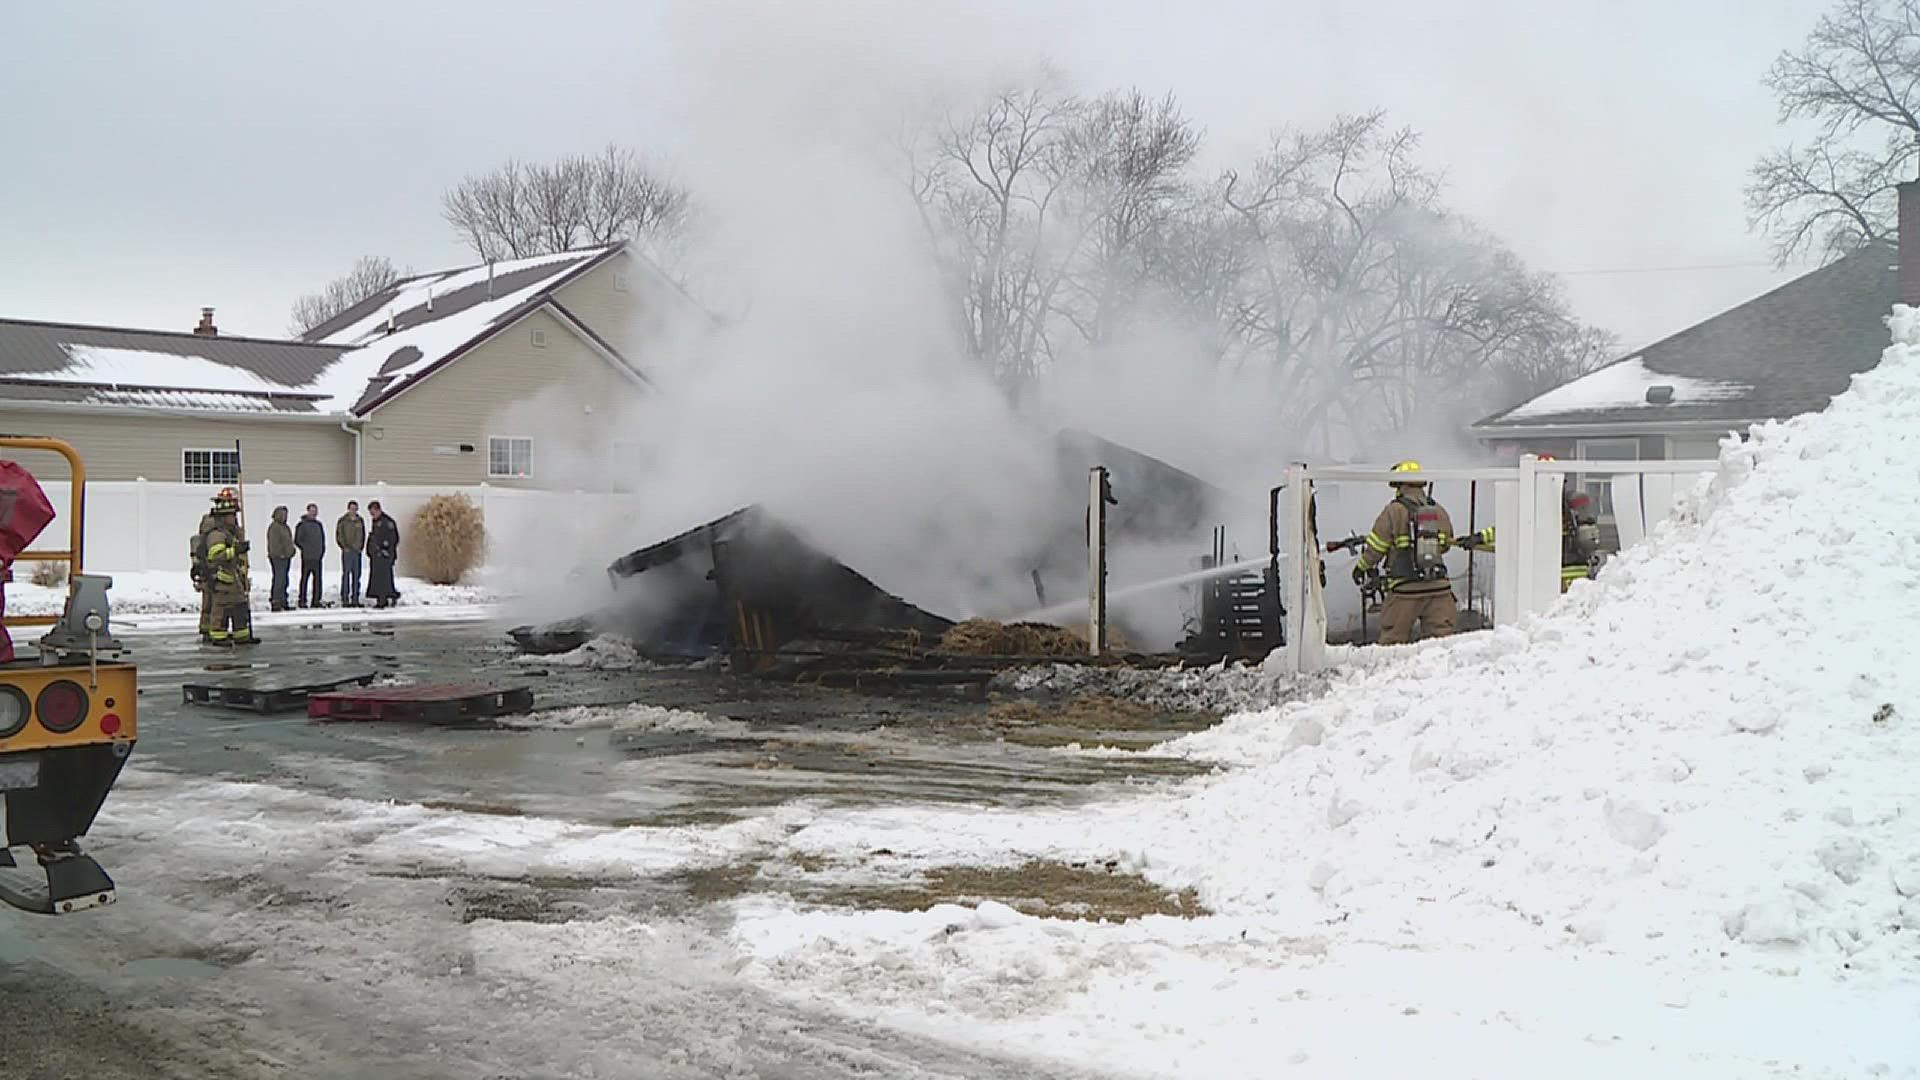 A garage in East Moline, Illinois, collapsed after heavy fire damage Sunday afternoon, Jan. 16.